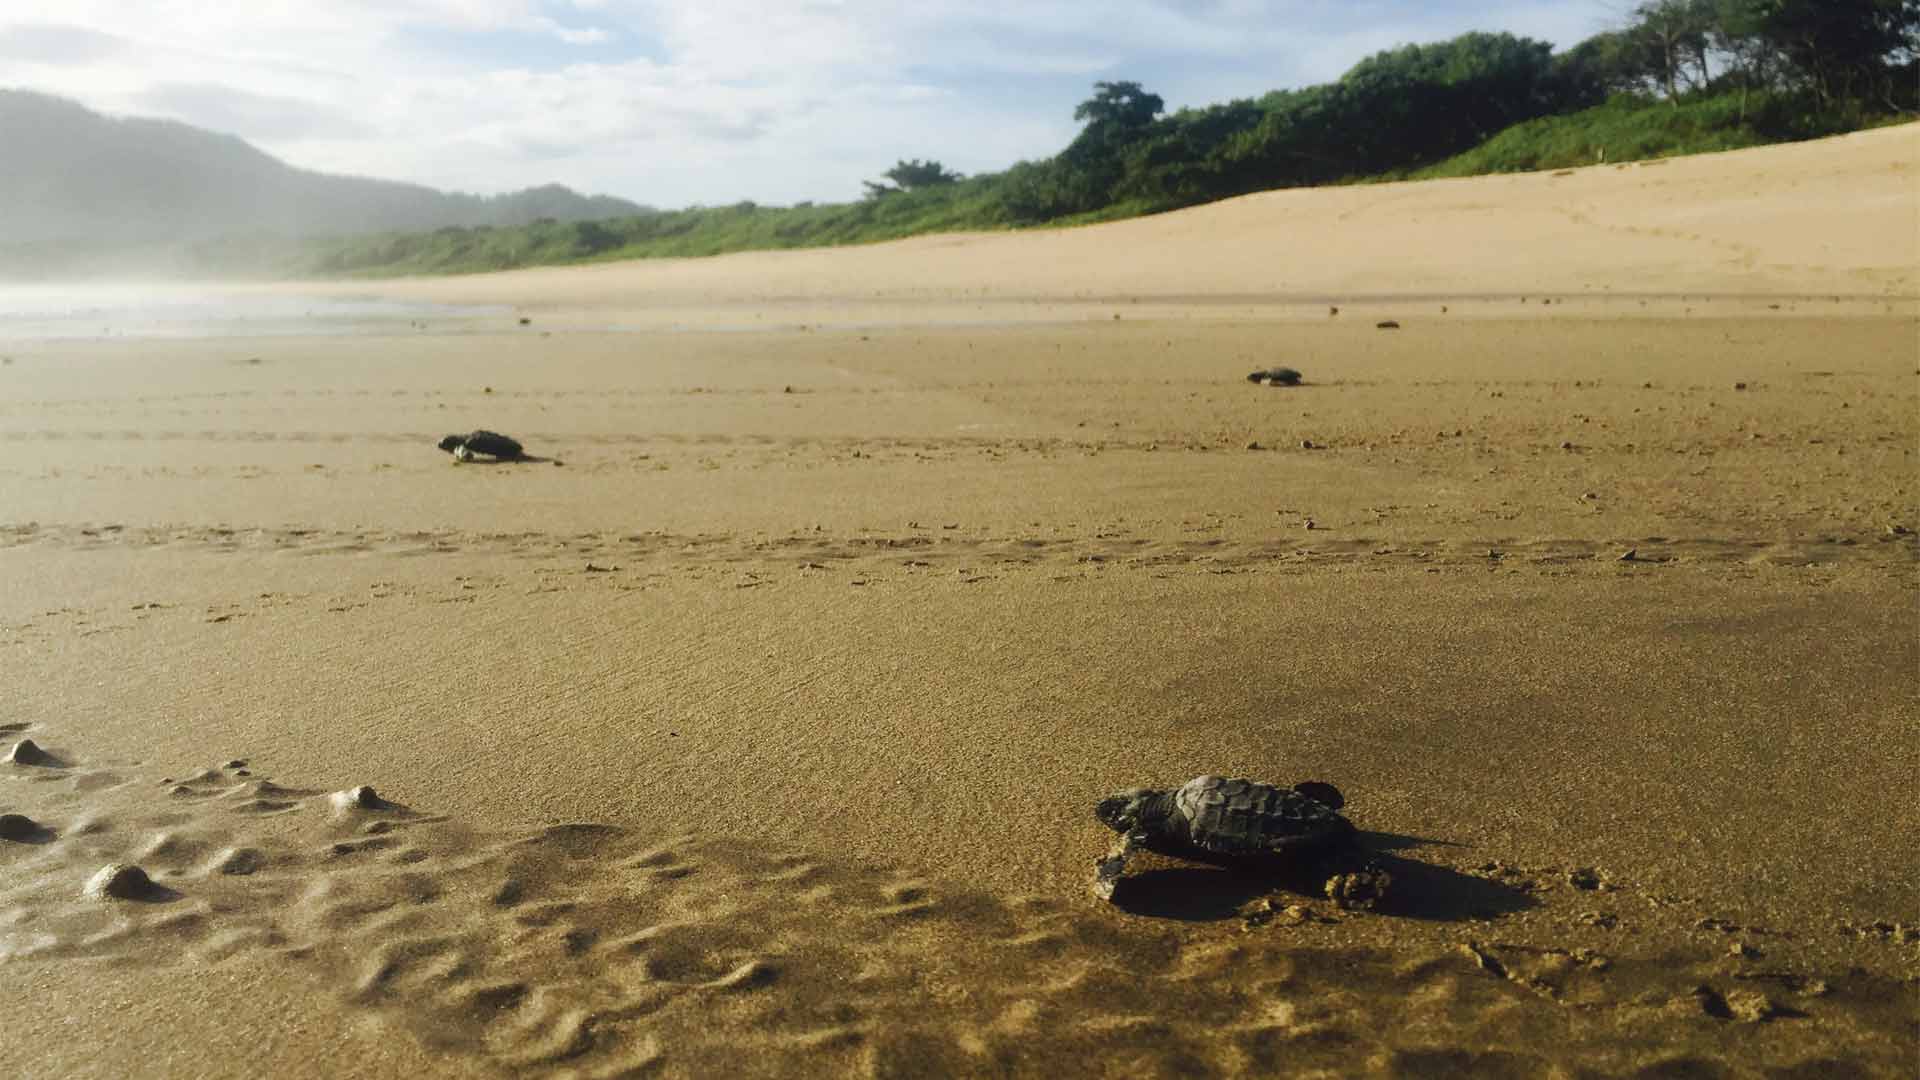 Baby leatherback turtles migrating from nest to sea on sandy beach at Playa Grande, Costa Rica